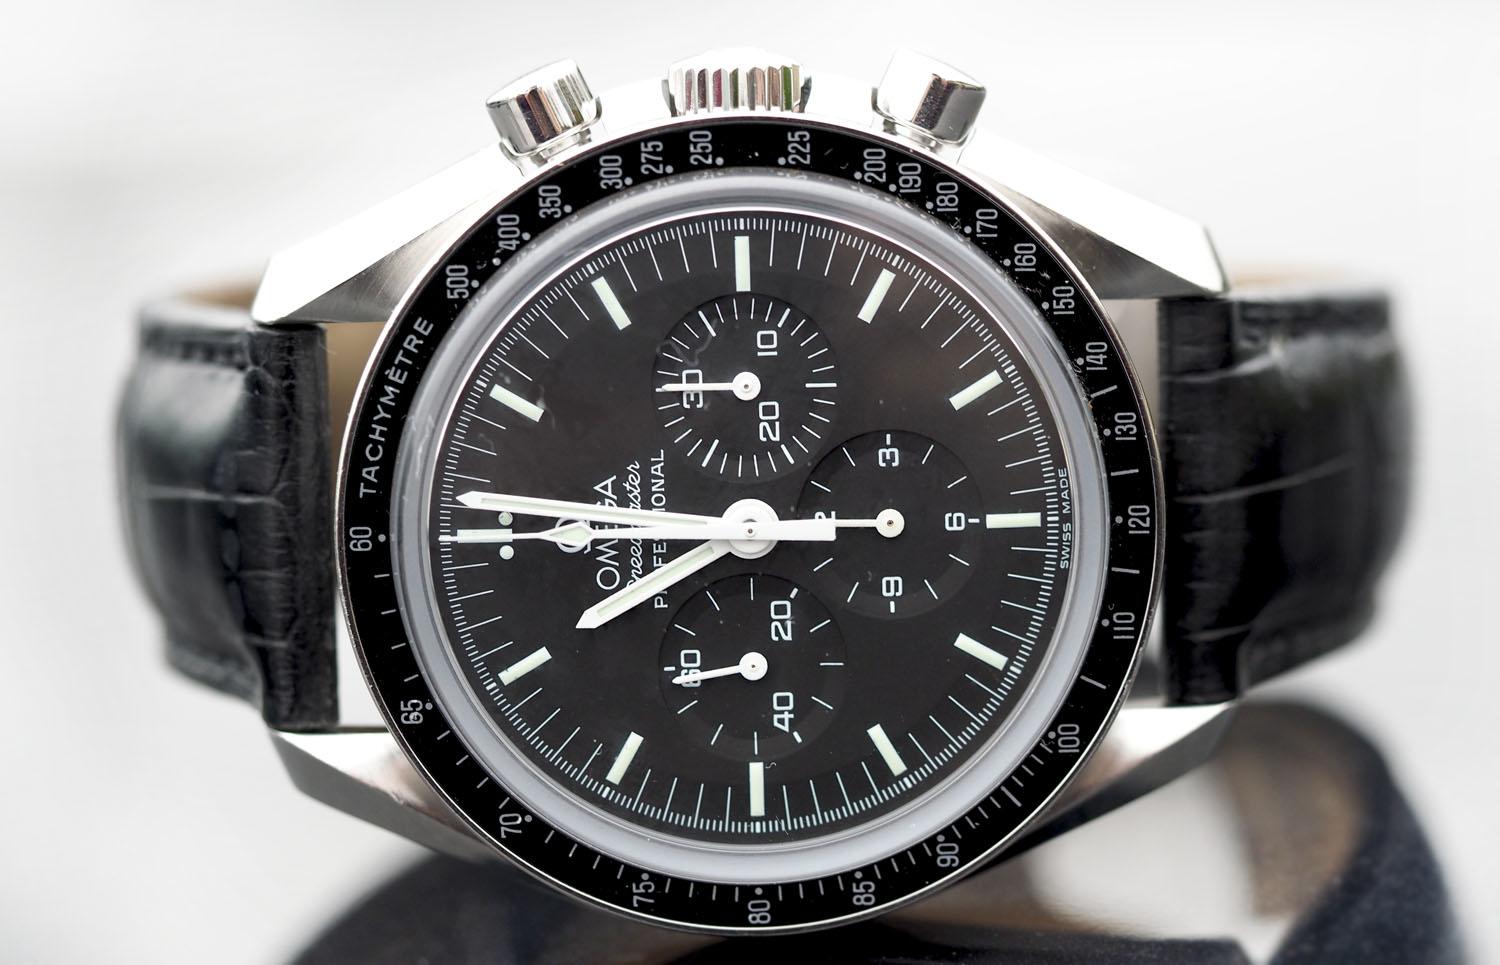 Pre-Owned Gents Omega Stainless Steel Speedmaster Moonwatch Ref 3873.50.31 with Box and Warranty Cards.

This manual winding chronograph has the following features:
Metal: Stainless Steel Case
Band: Black Leather Strap with Deployment Buckle
Dial